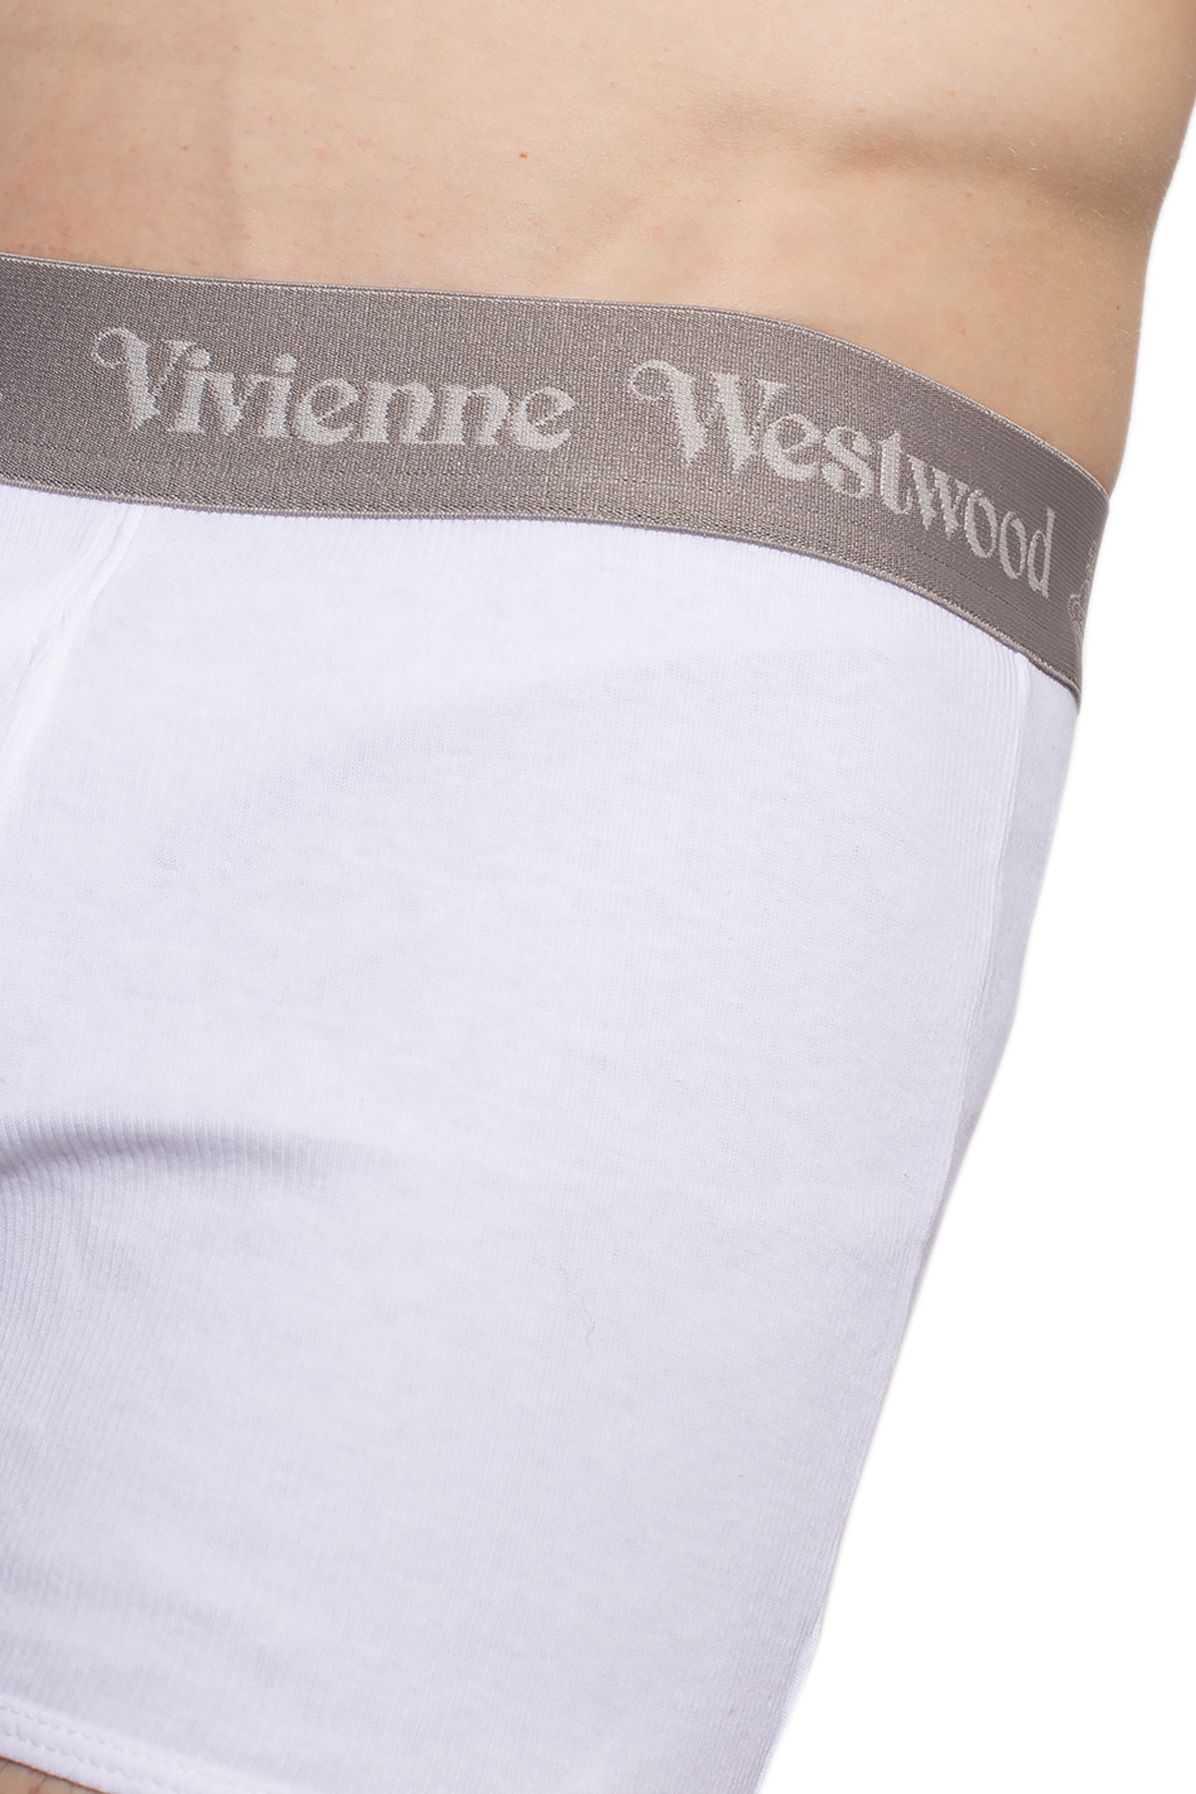 Vivienne Westwood Boxers with logo